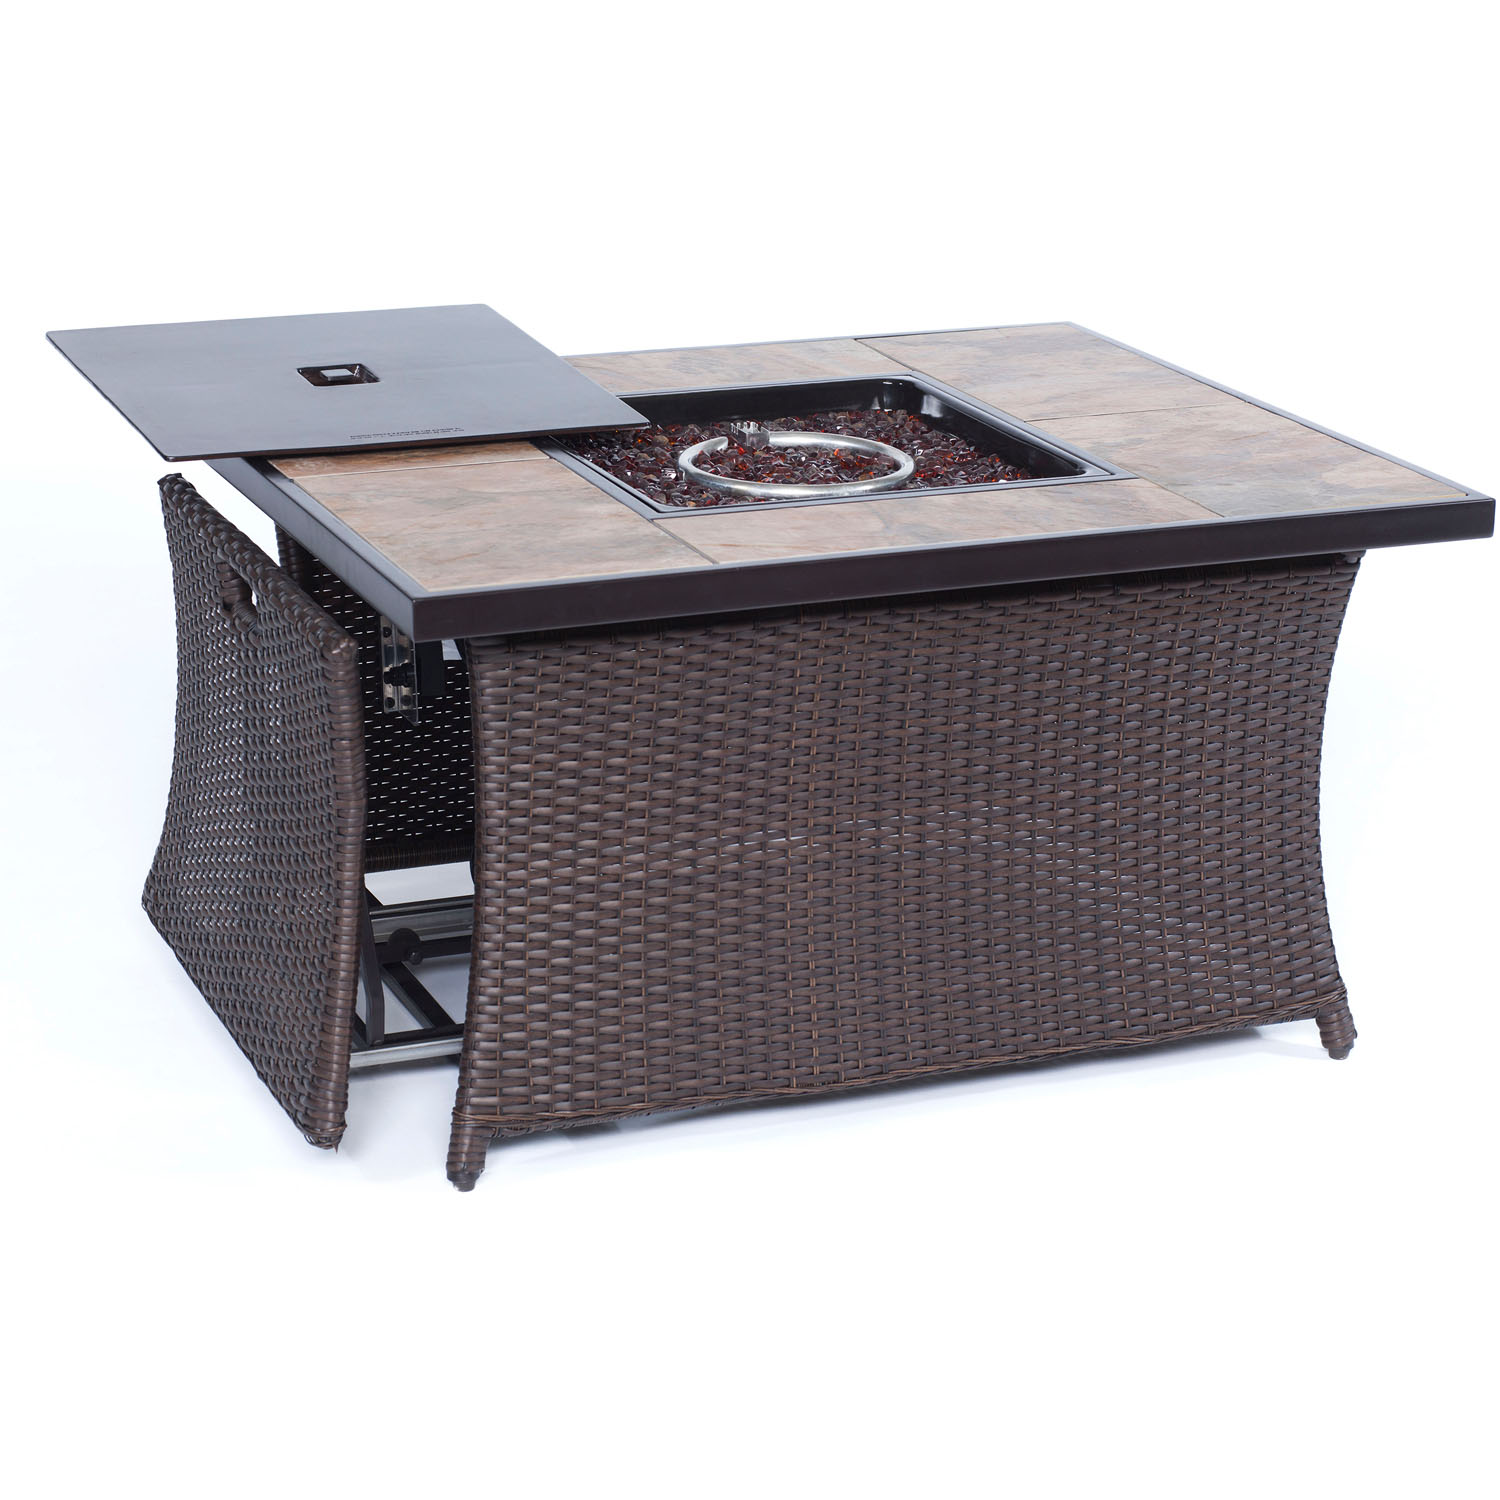 Hanover Ventura 4-Piece Fire Pit Lounge Set with Faux-Stone Tile Top - image 5 of 11